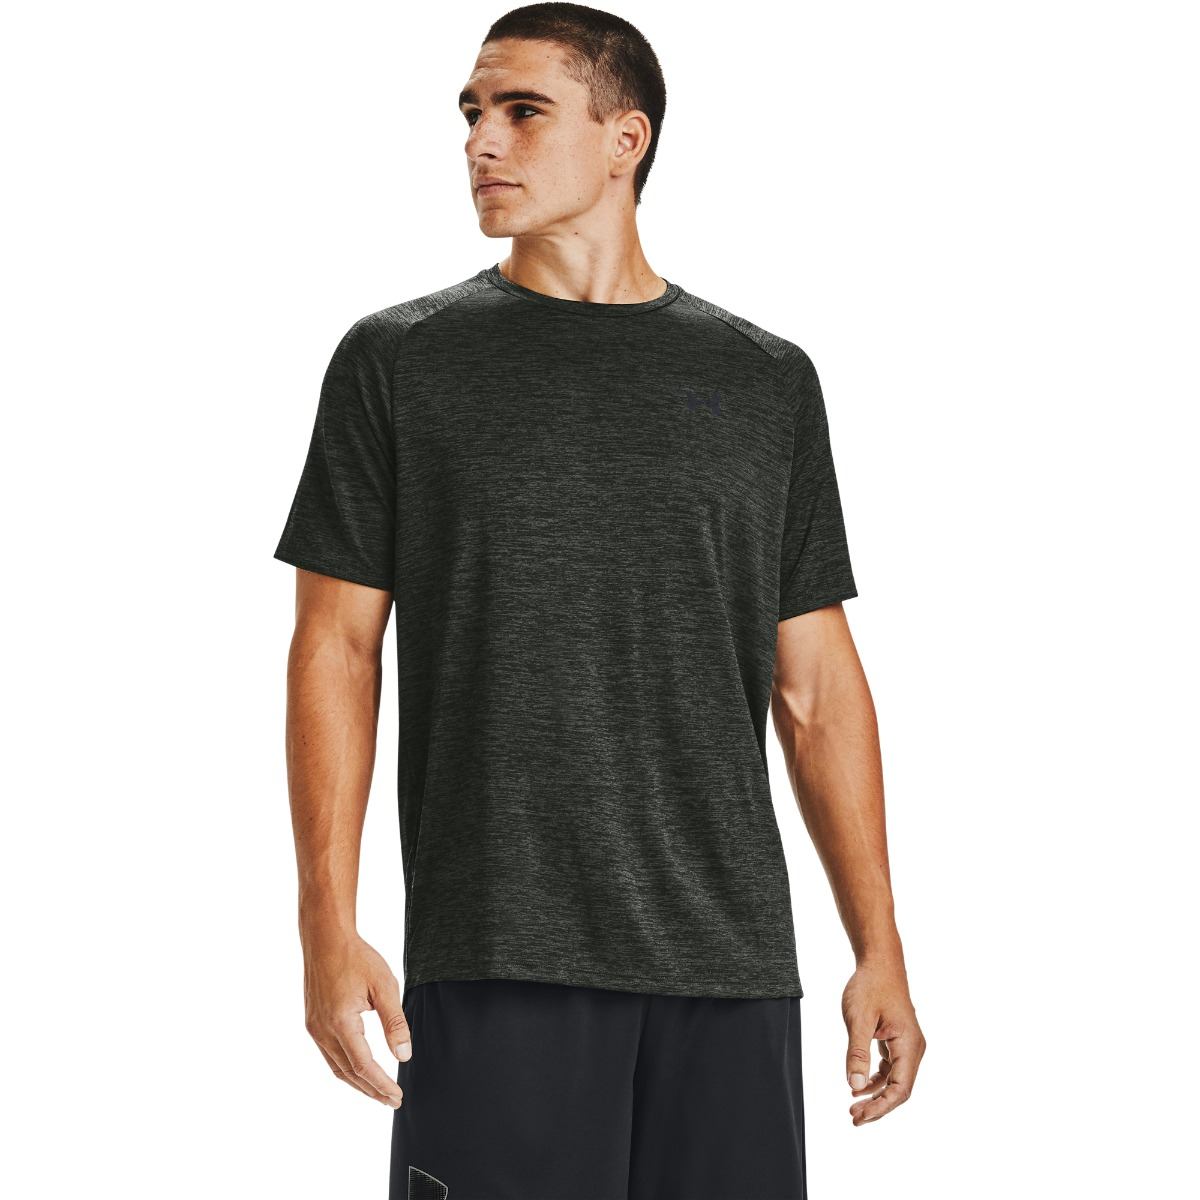 Se Under Armour Tech 2.0 SS Tee - Baroque Green/Black hos Muscle House